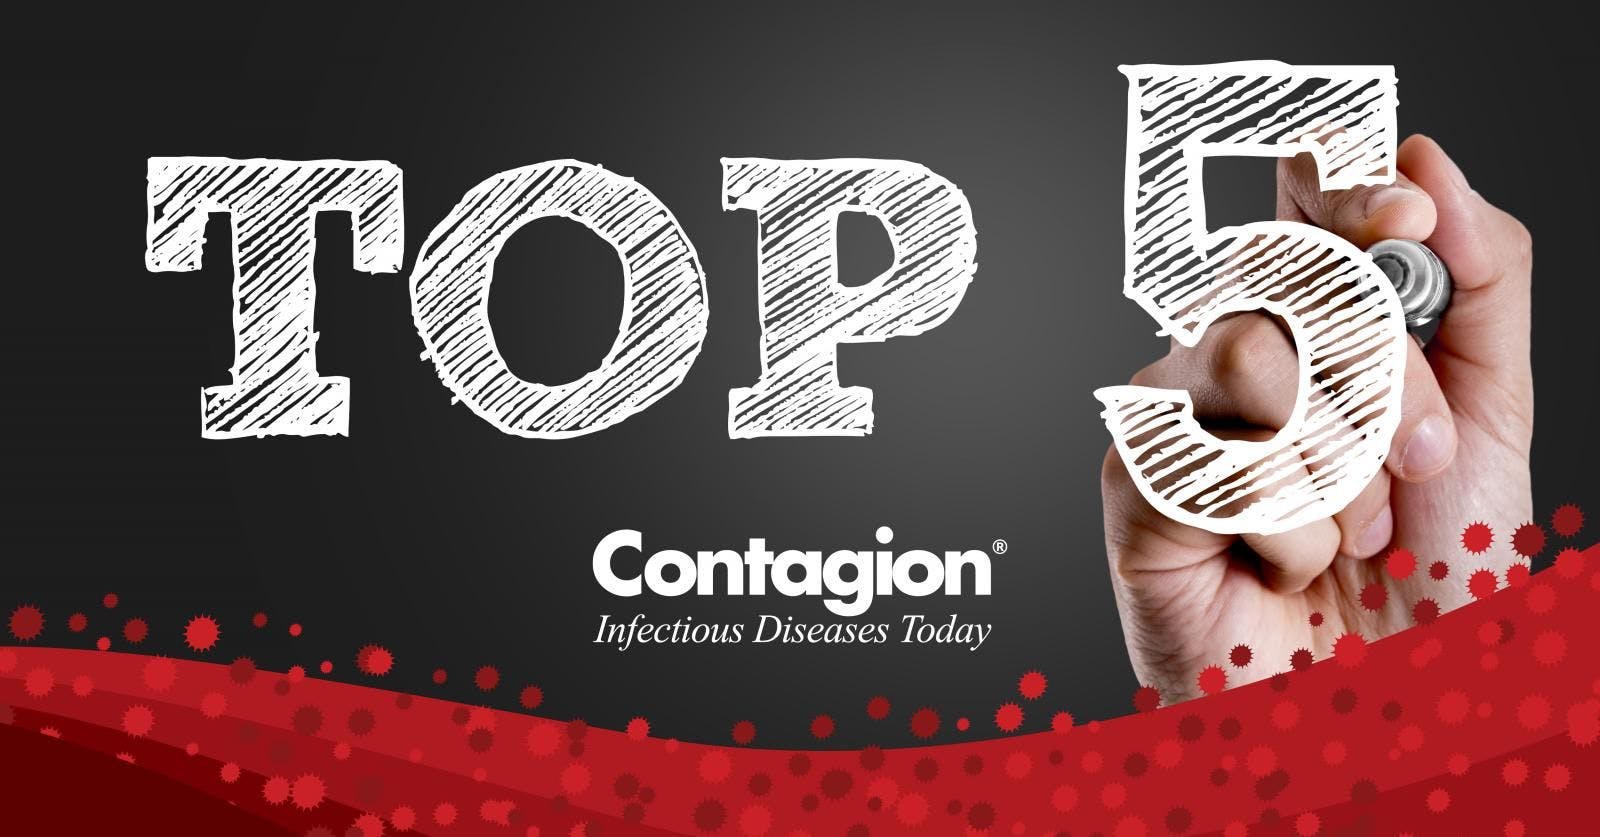 Top Infectious Disease News of the Week&mdash;October 27, 2019